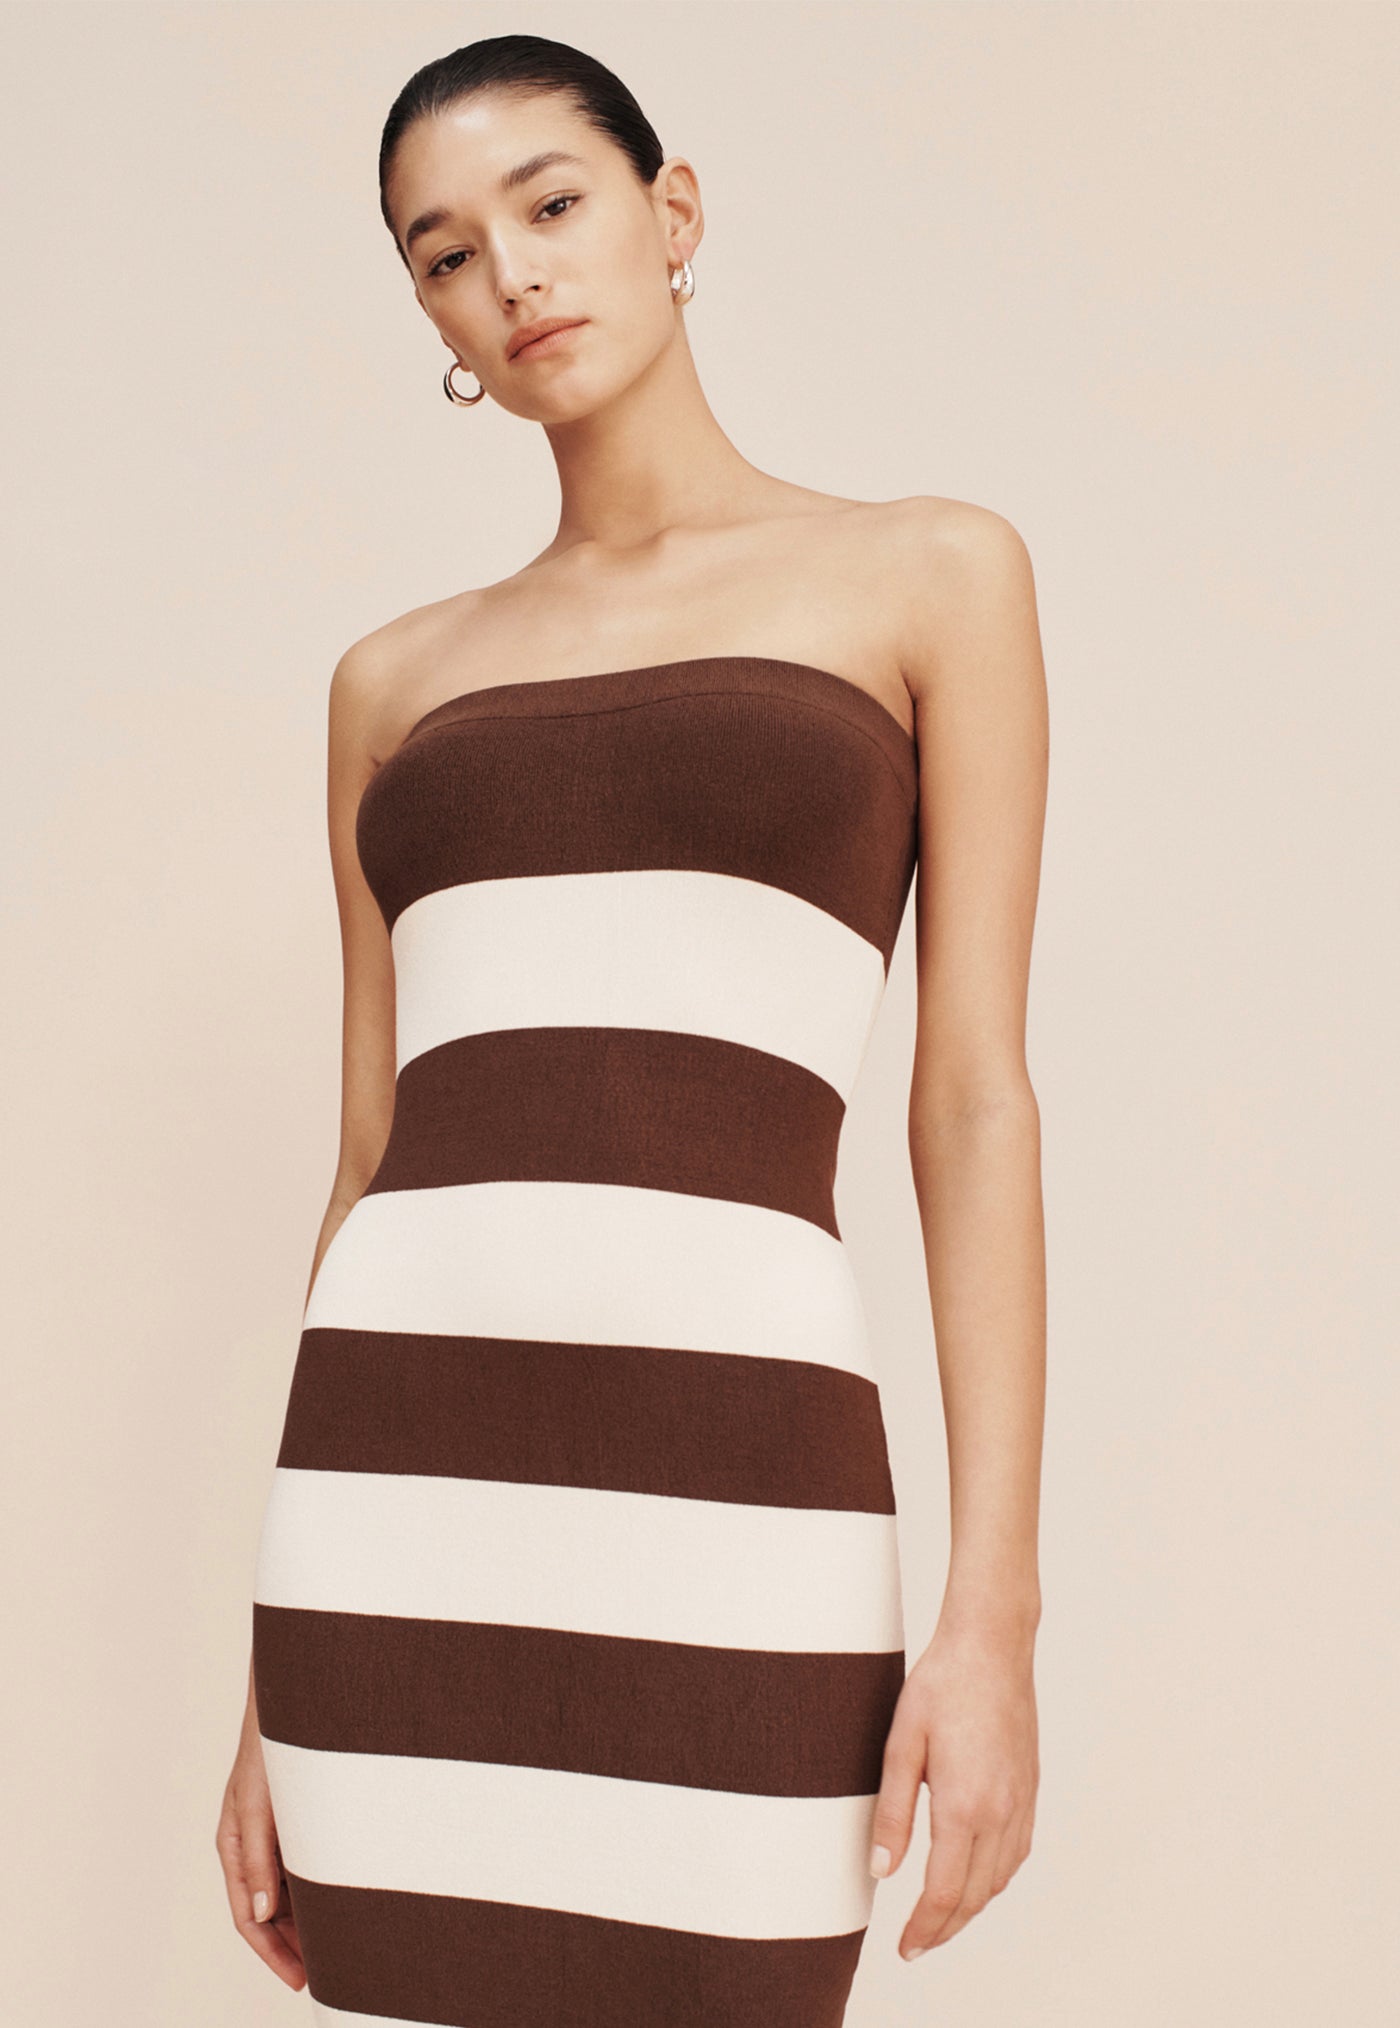 Theo Strapless Dress - Chocolate/Cream sold by Angel Divine